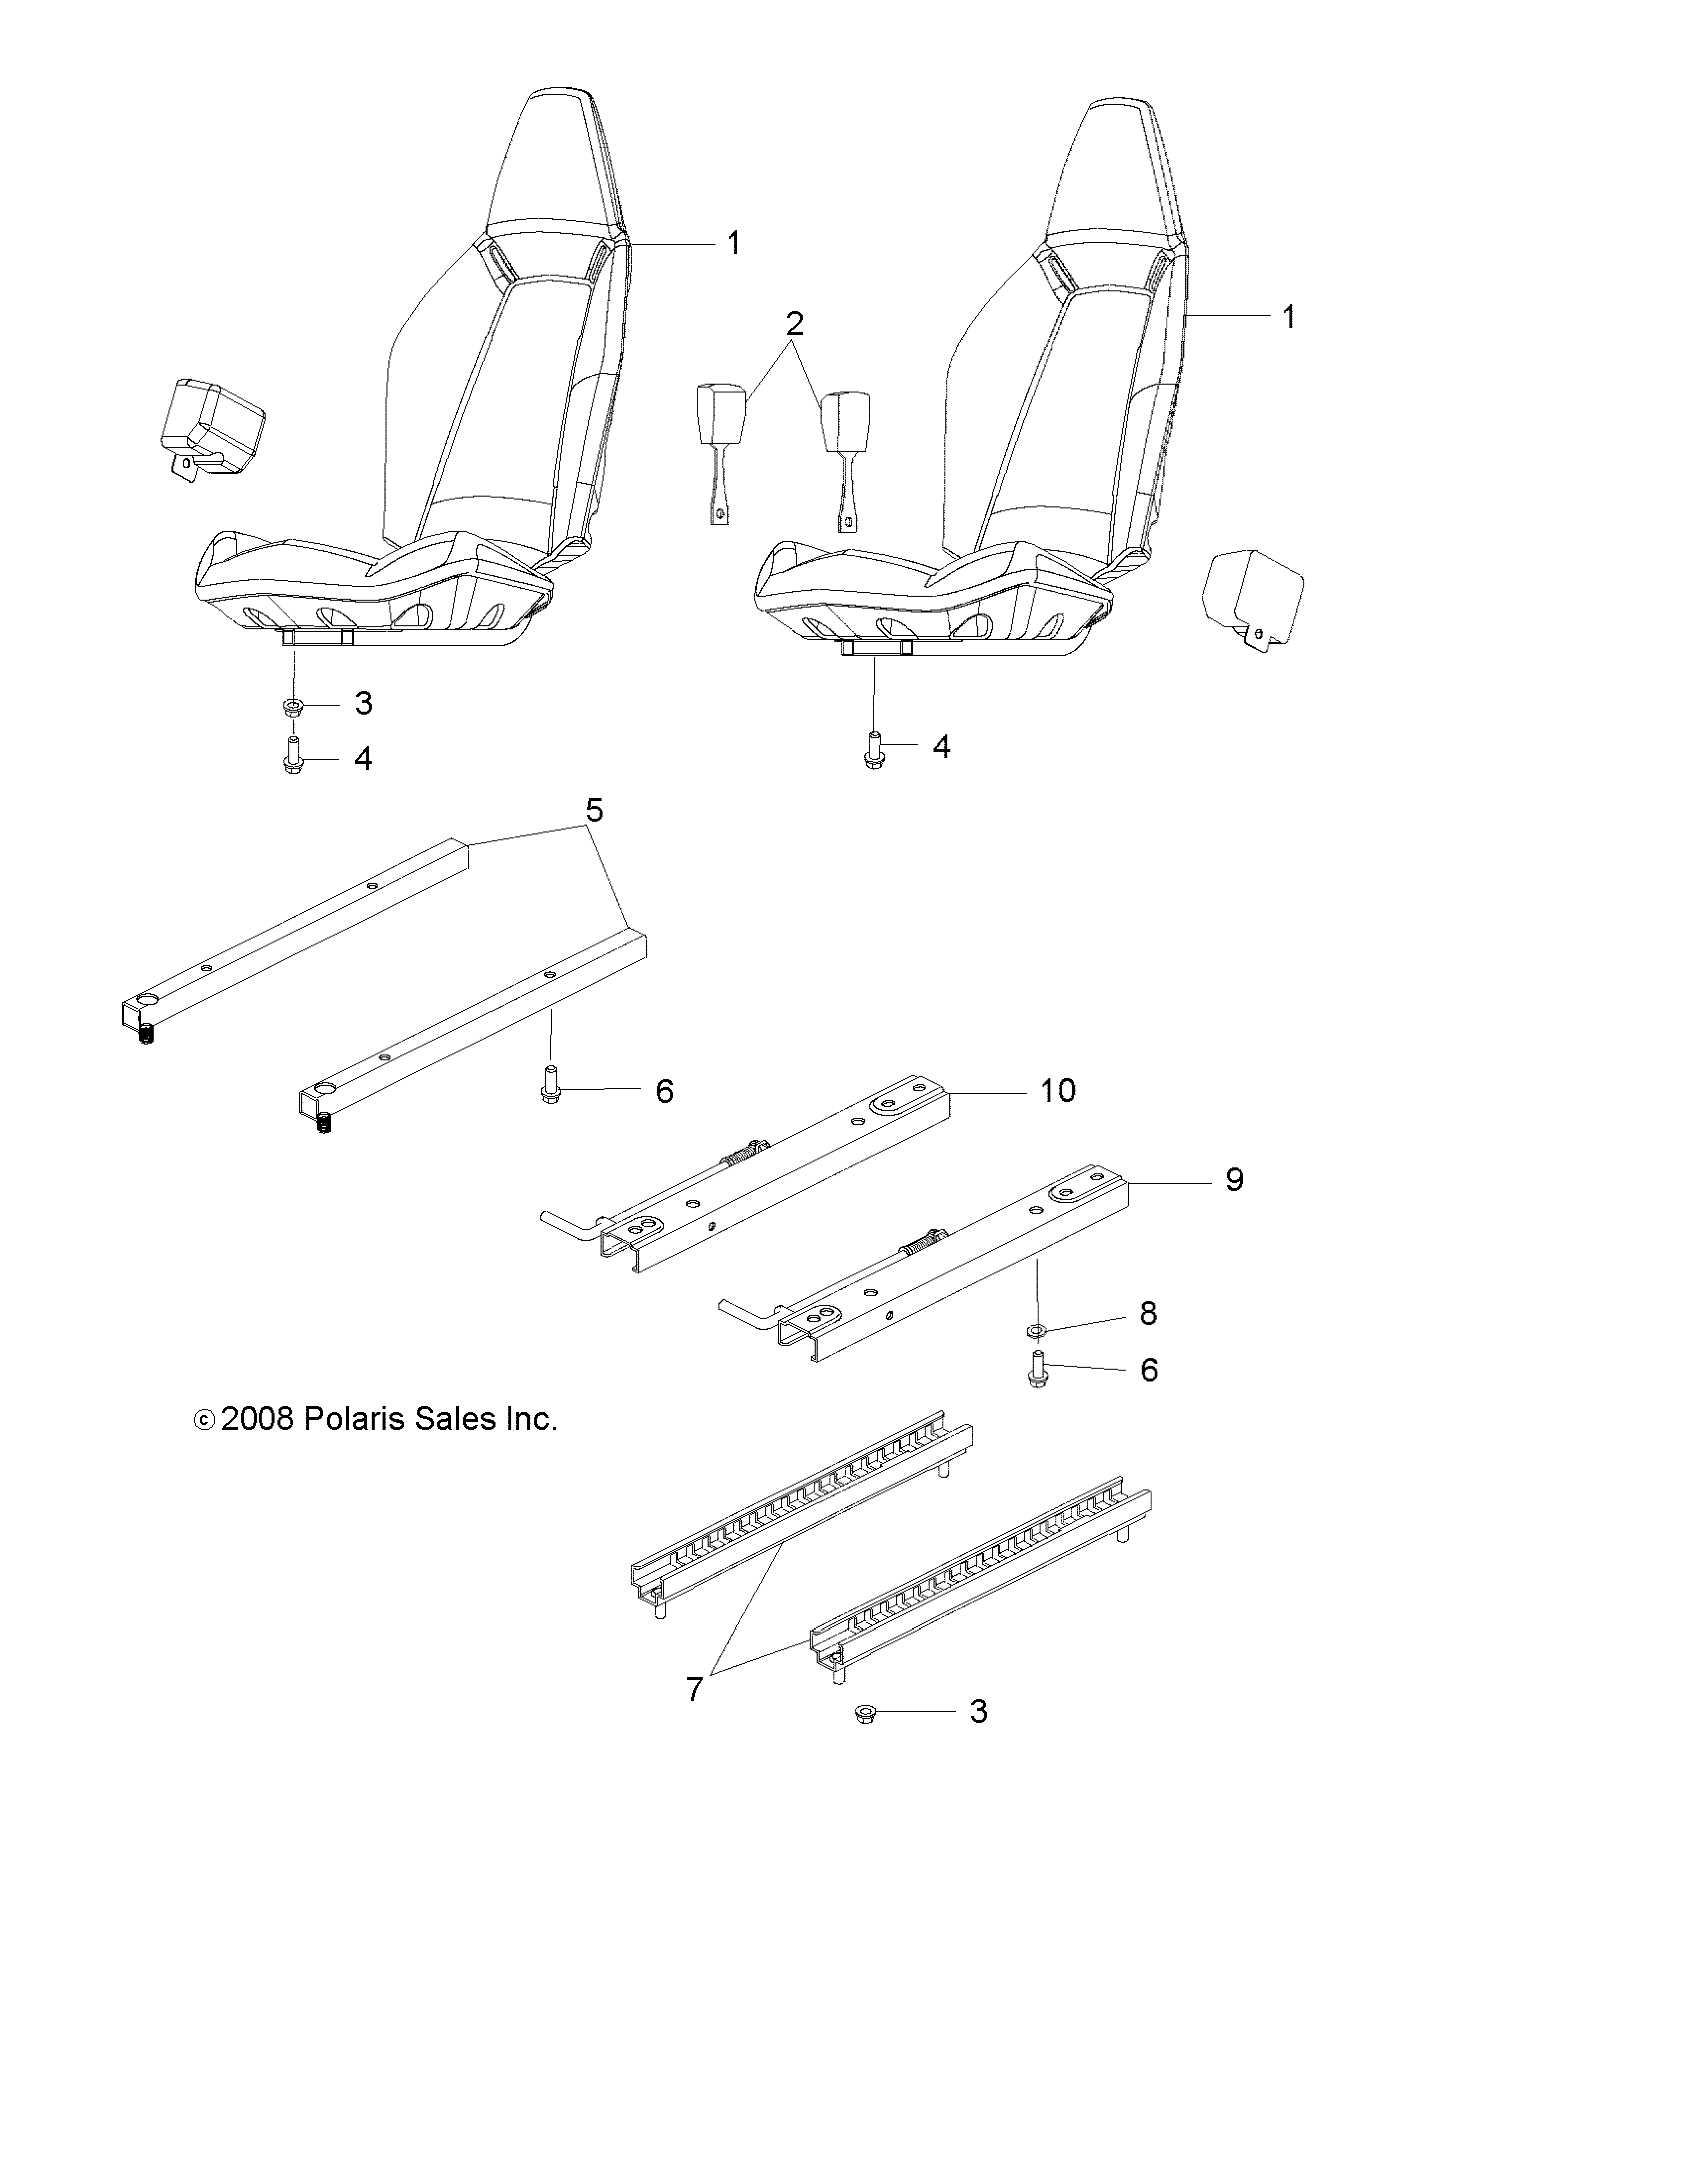 BODY, SEAT, MOUNTING and BELTS - A09VA17AA/AD (49RGRSEATMTG09RZR170)